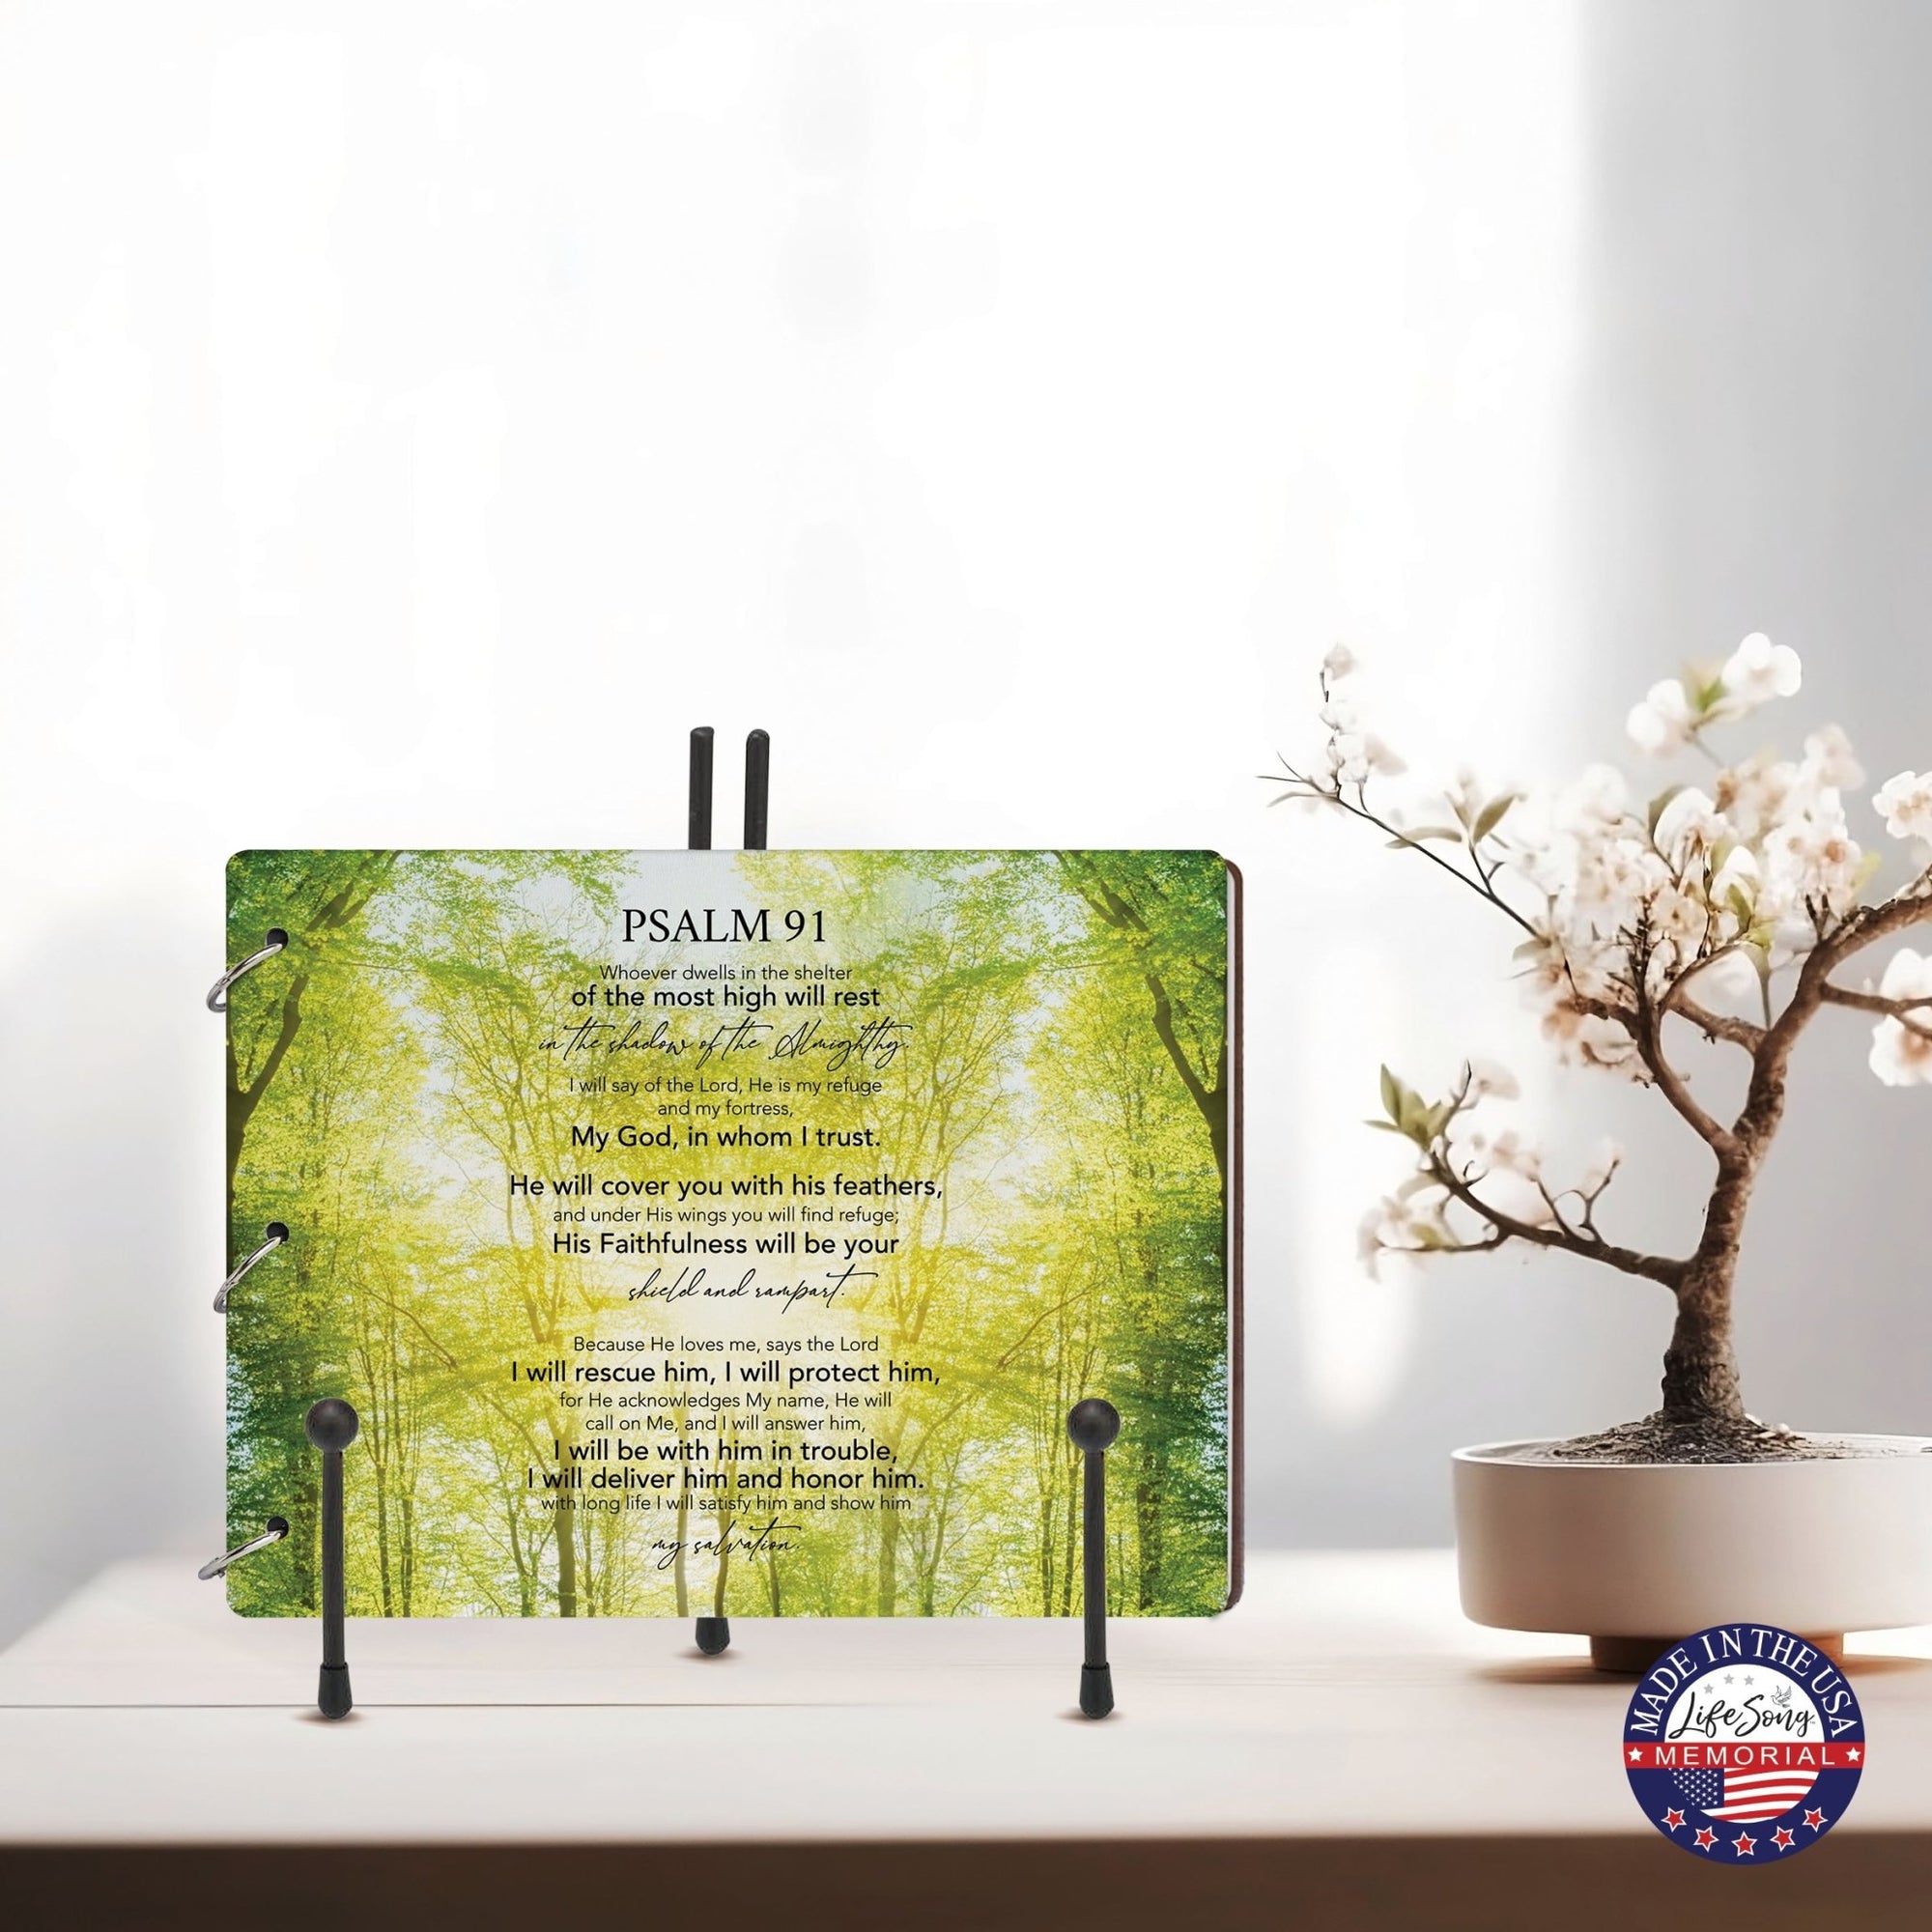 Celebration Of Life Funeral Guest Books For Memorial Services Registry With Wooden Cover - Psalm 91 - LifeSong Milestones